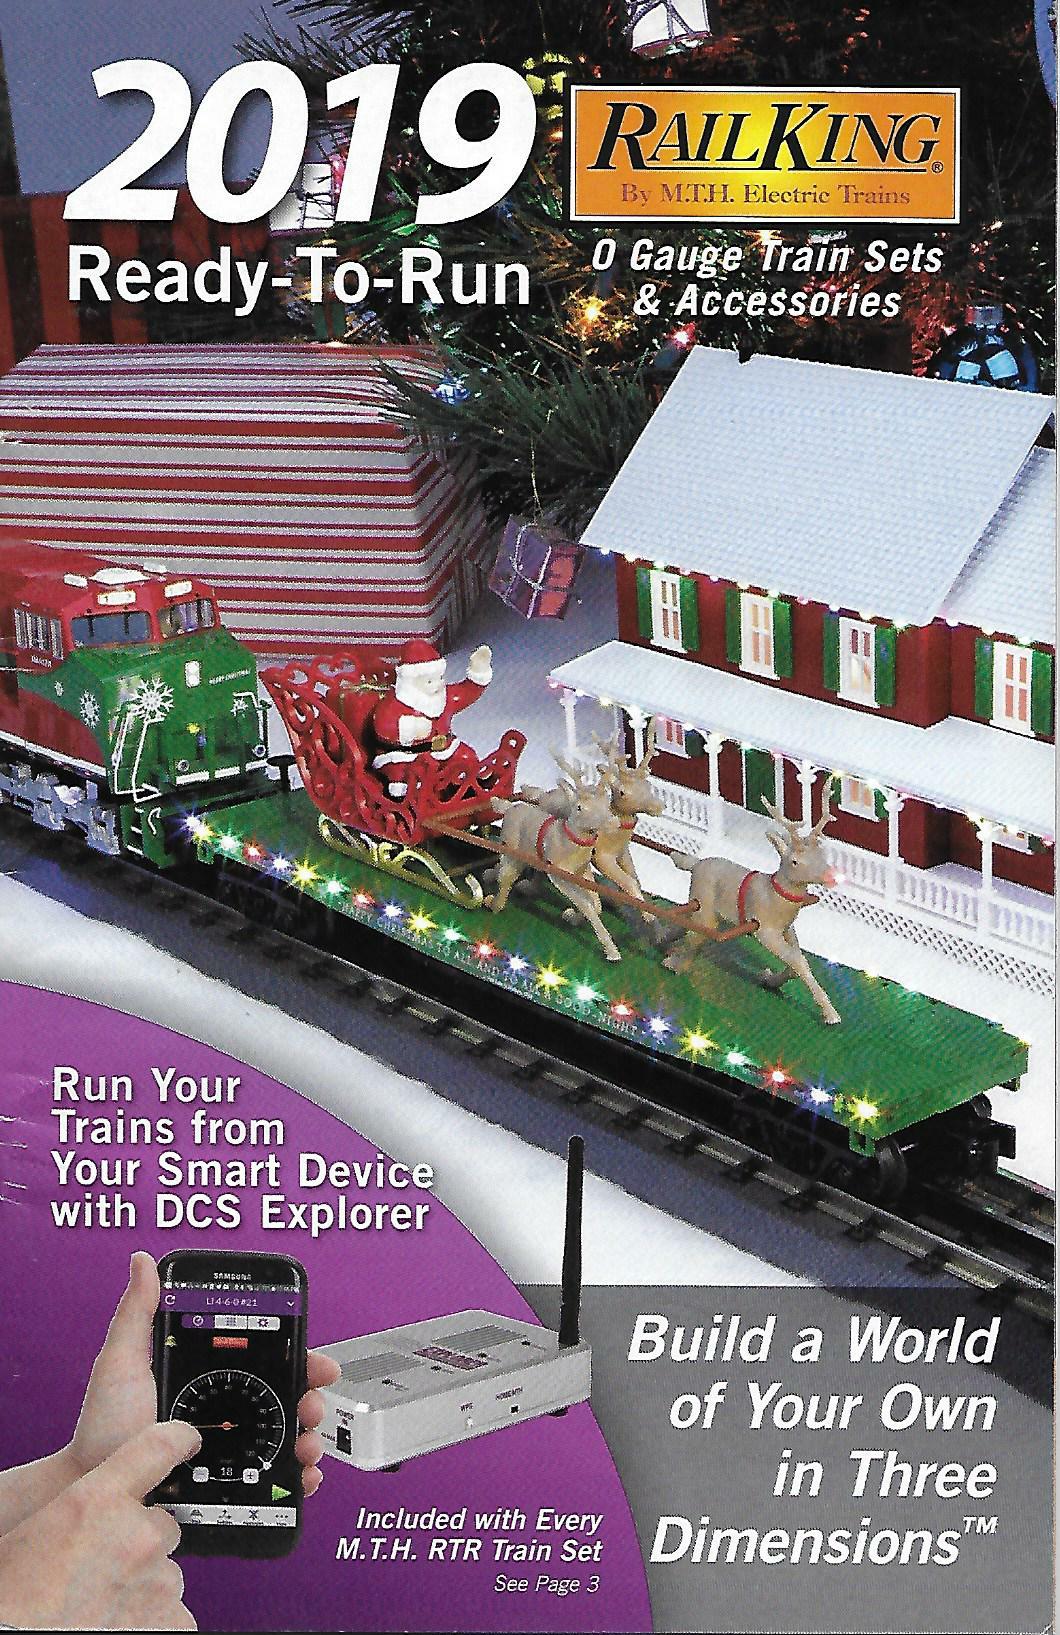 MTH 2019 Ready-To-Run Train Sets & Accessories Catalog image